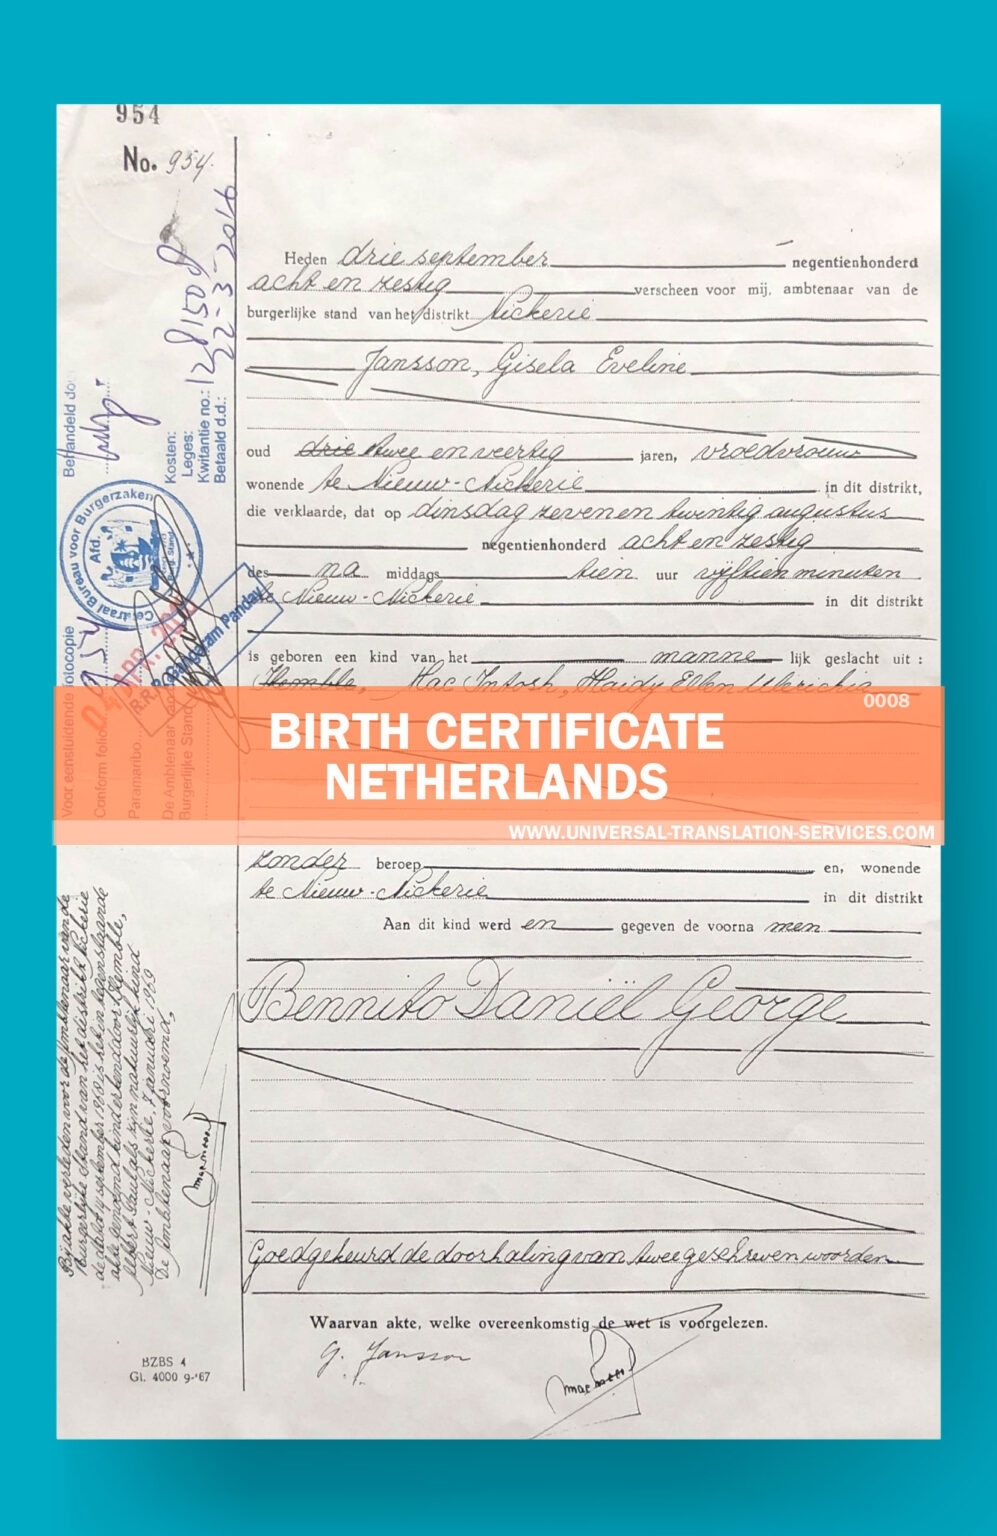 Birth Certificate Translation Template Netherlands At $15 (Best Offer) Throughout Birth Certificate Translation Template